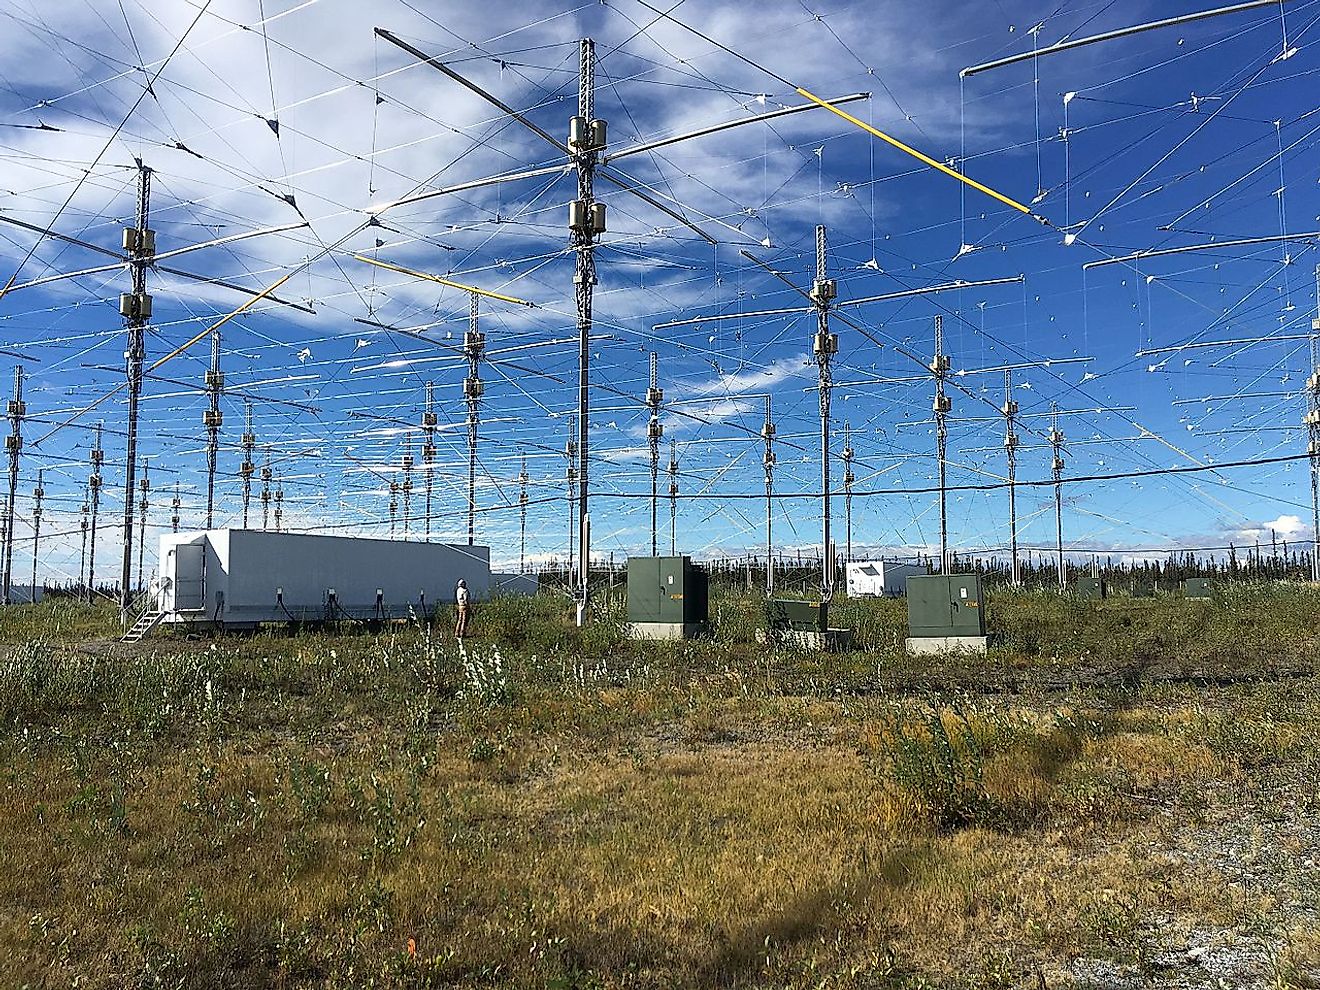 Part of the antenna array at the High-Frequency Active Auroral Research Program. Image credit: Secoy, A/Wikimedia.org